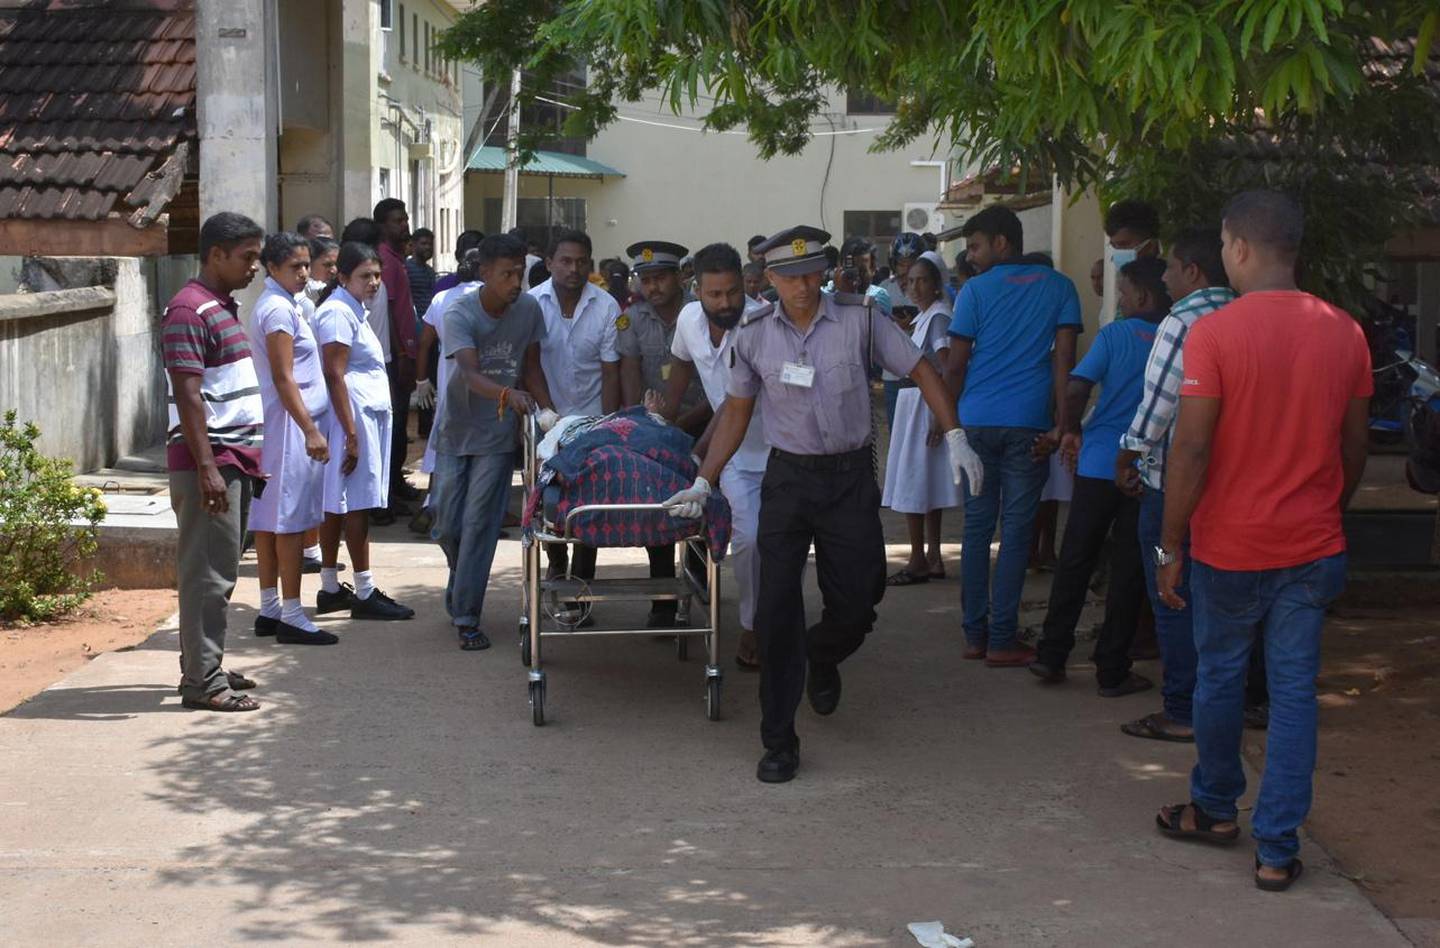 epa07518954 One of the blast victim is brought to a hospital in Colombo, Sri Lanka, 21 April 2019. According to the news reports at least 138 people killed and over 400 injured in a series of blasts during the Easter Sunday service at St Anthony's Church in Kochchikade, Shangri-La Hotel and Kingsbury Hotel with many more places.  EPA/M.A. PUSHPA KUMARA